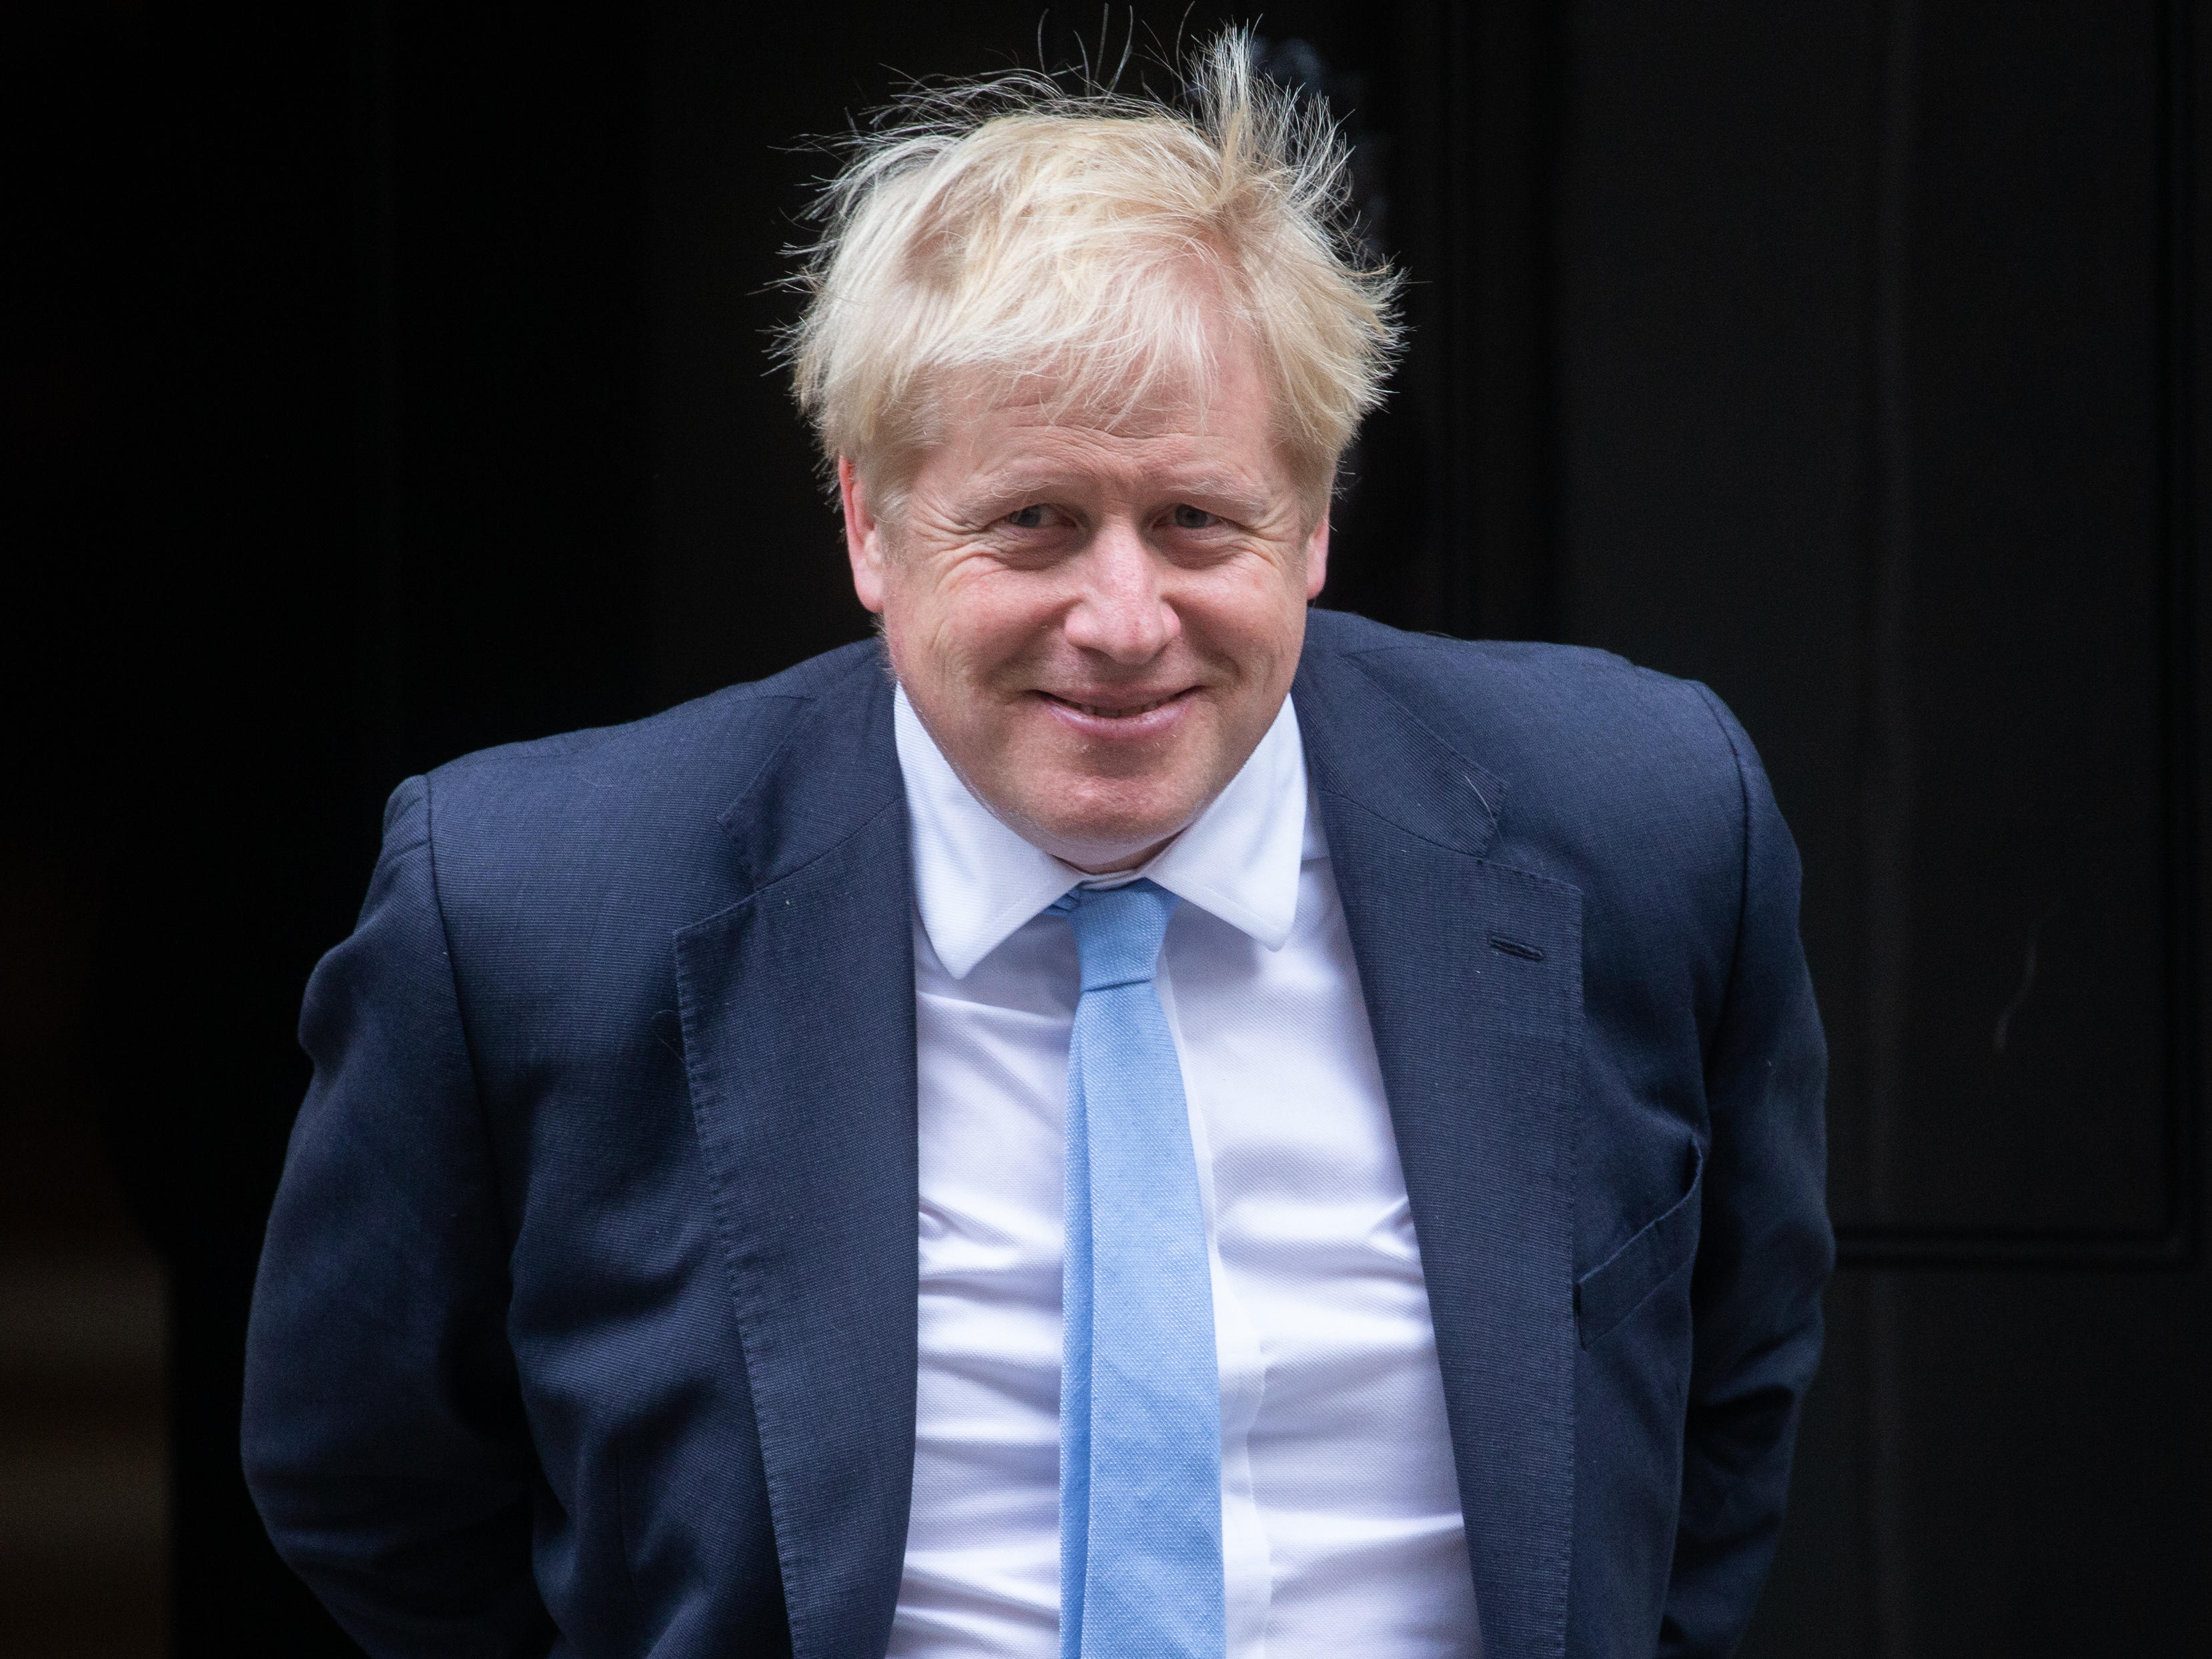 Boris Johnson shows his affiliative smile that helped him to connect with voters